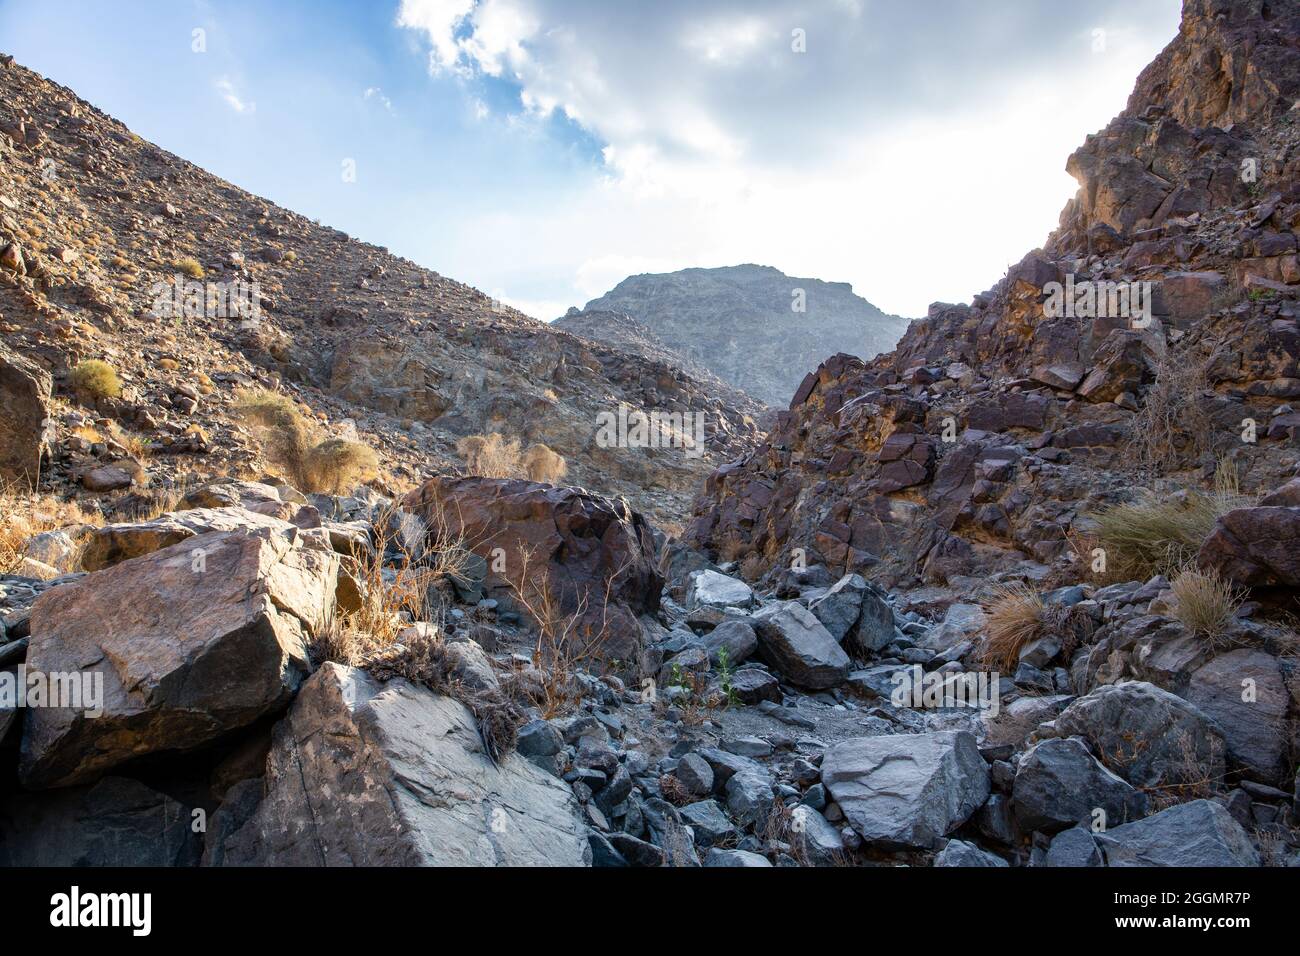 Stony, dry riverbed (wadi) with remains of raw ore of copper, green stones and rocks, Copper Hike Trail, Hatta, Hajar Mountains, UAE. Stock Photo